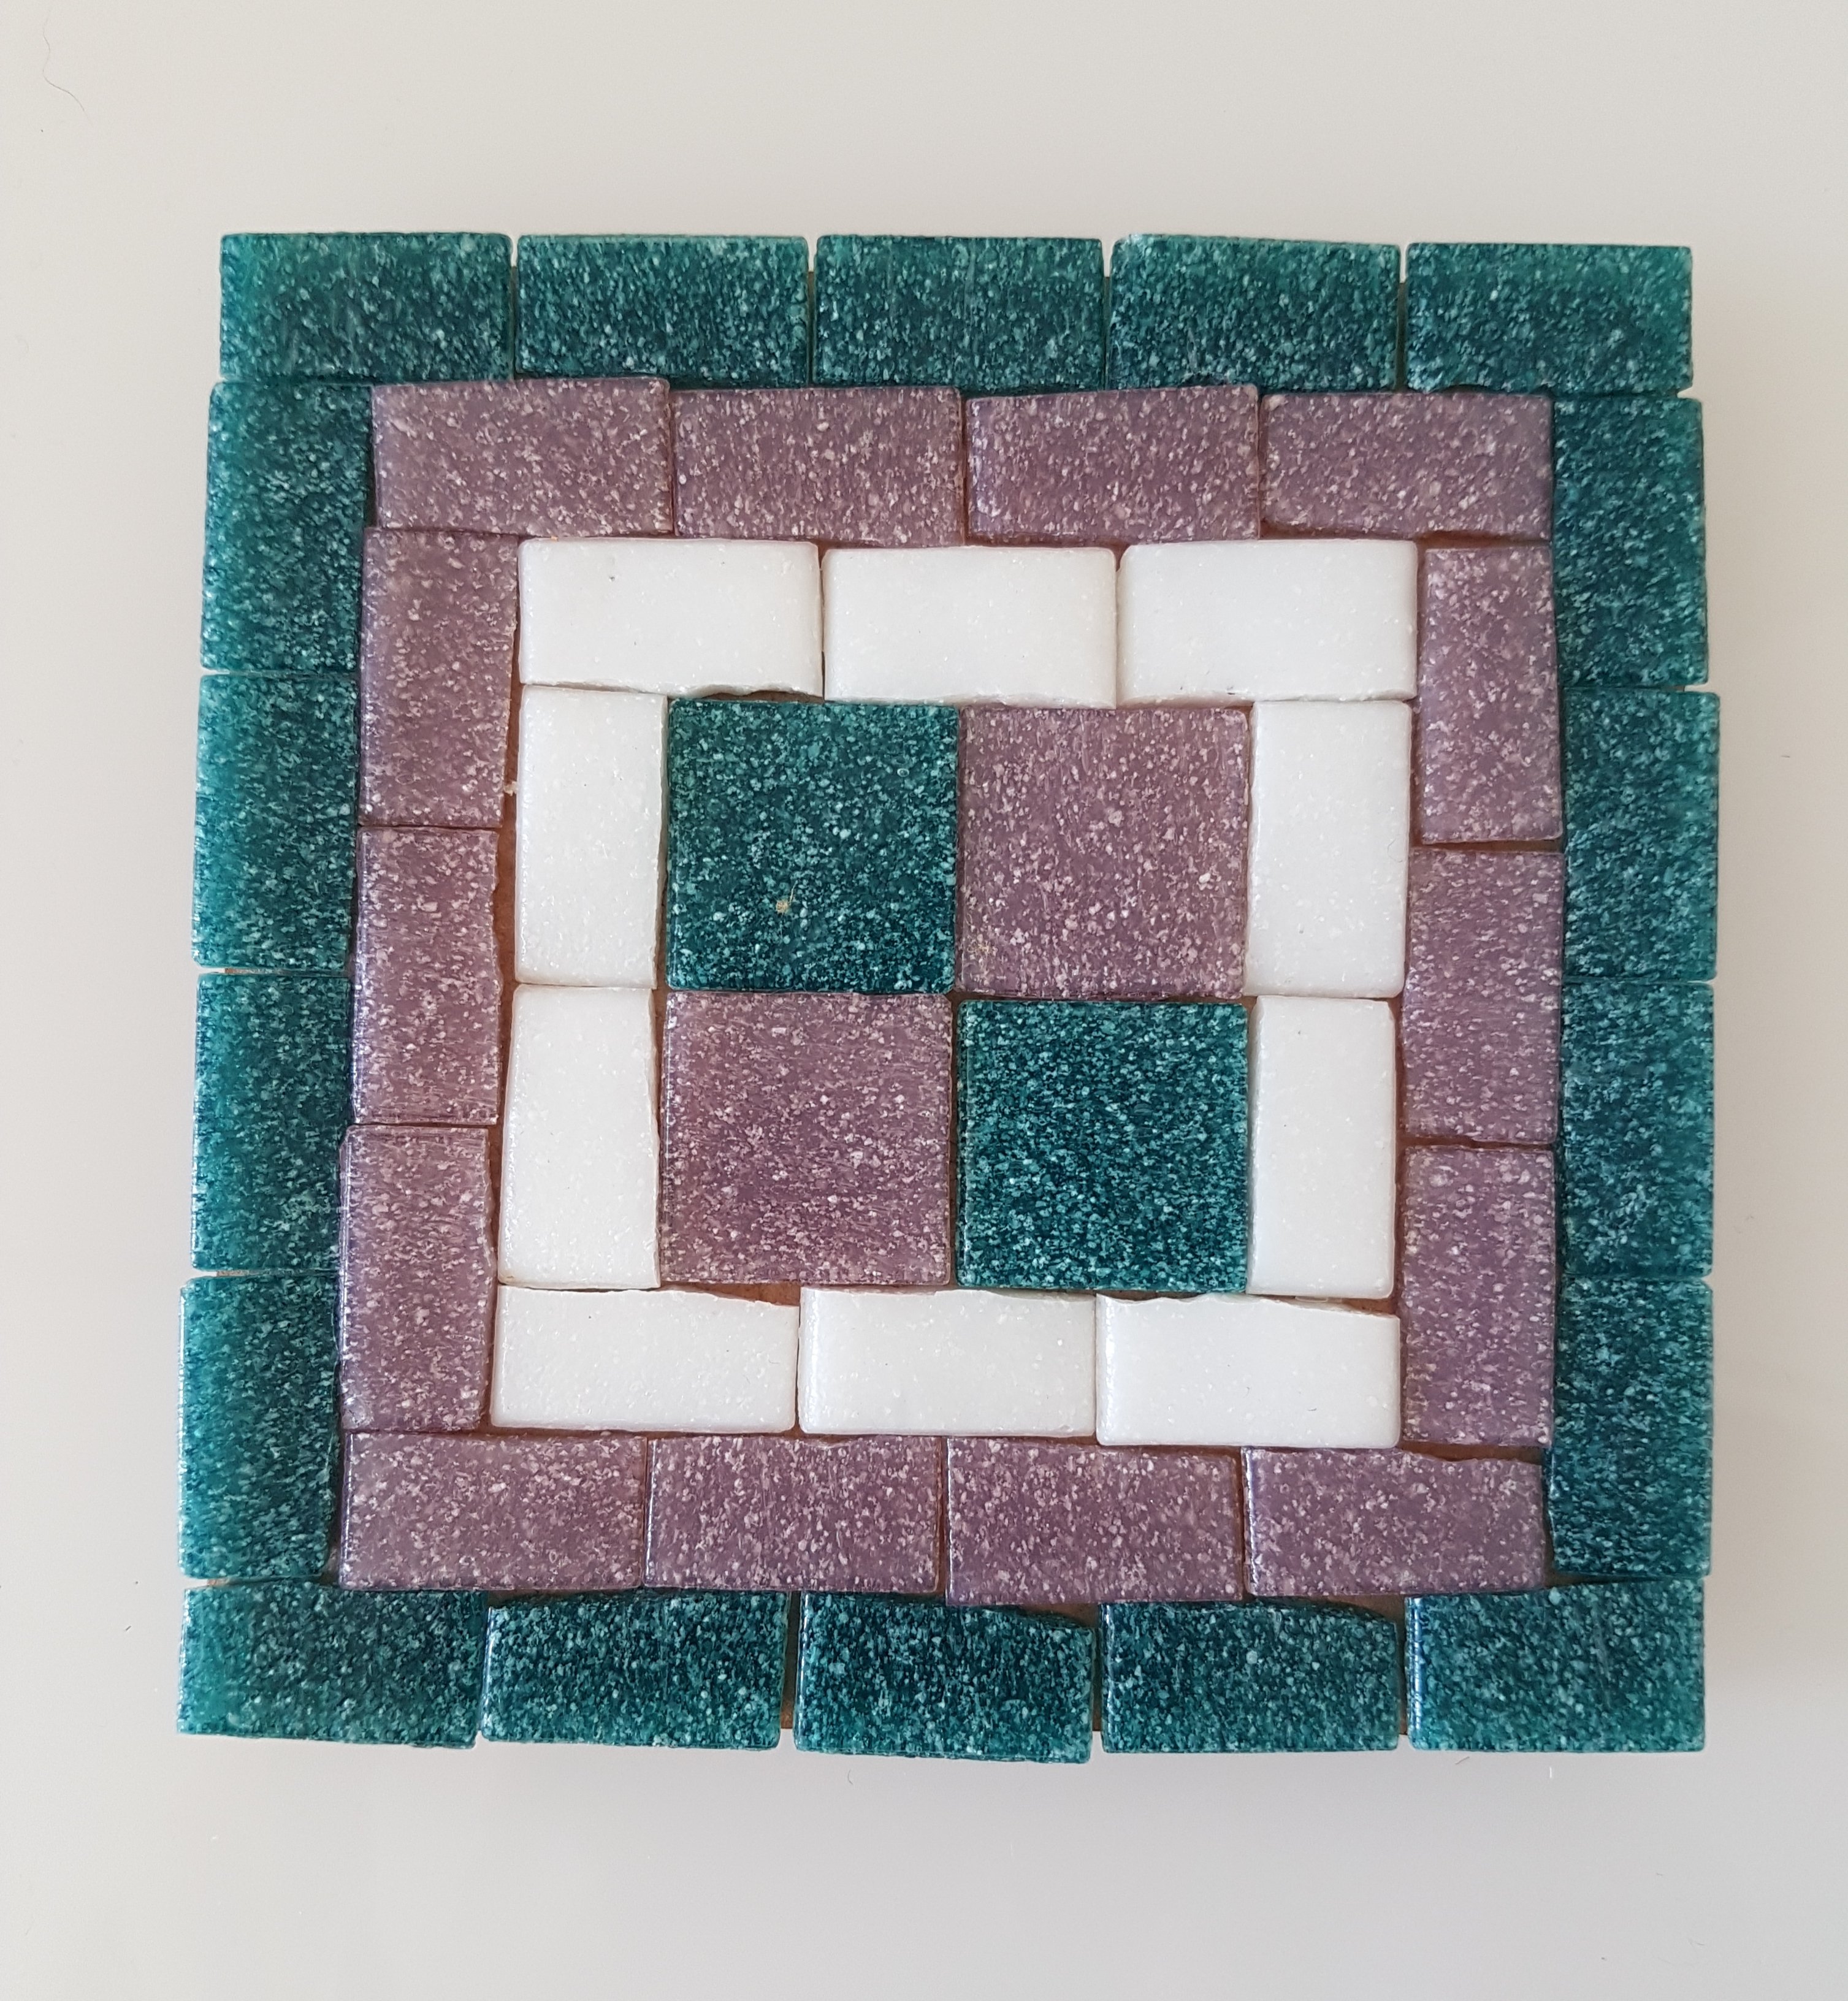 Introduction to mosaic making with Mossy Mosaic